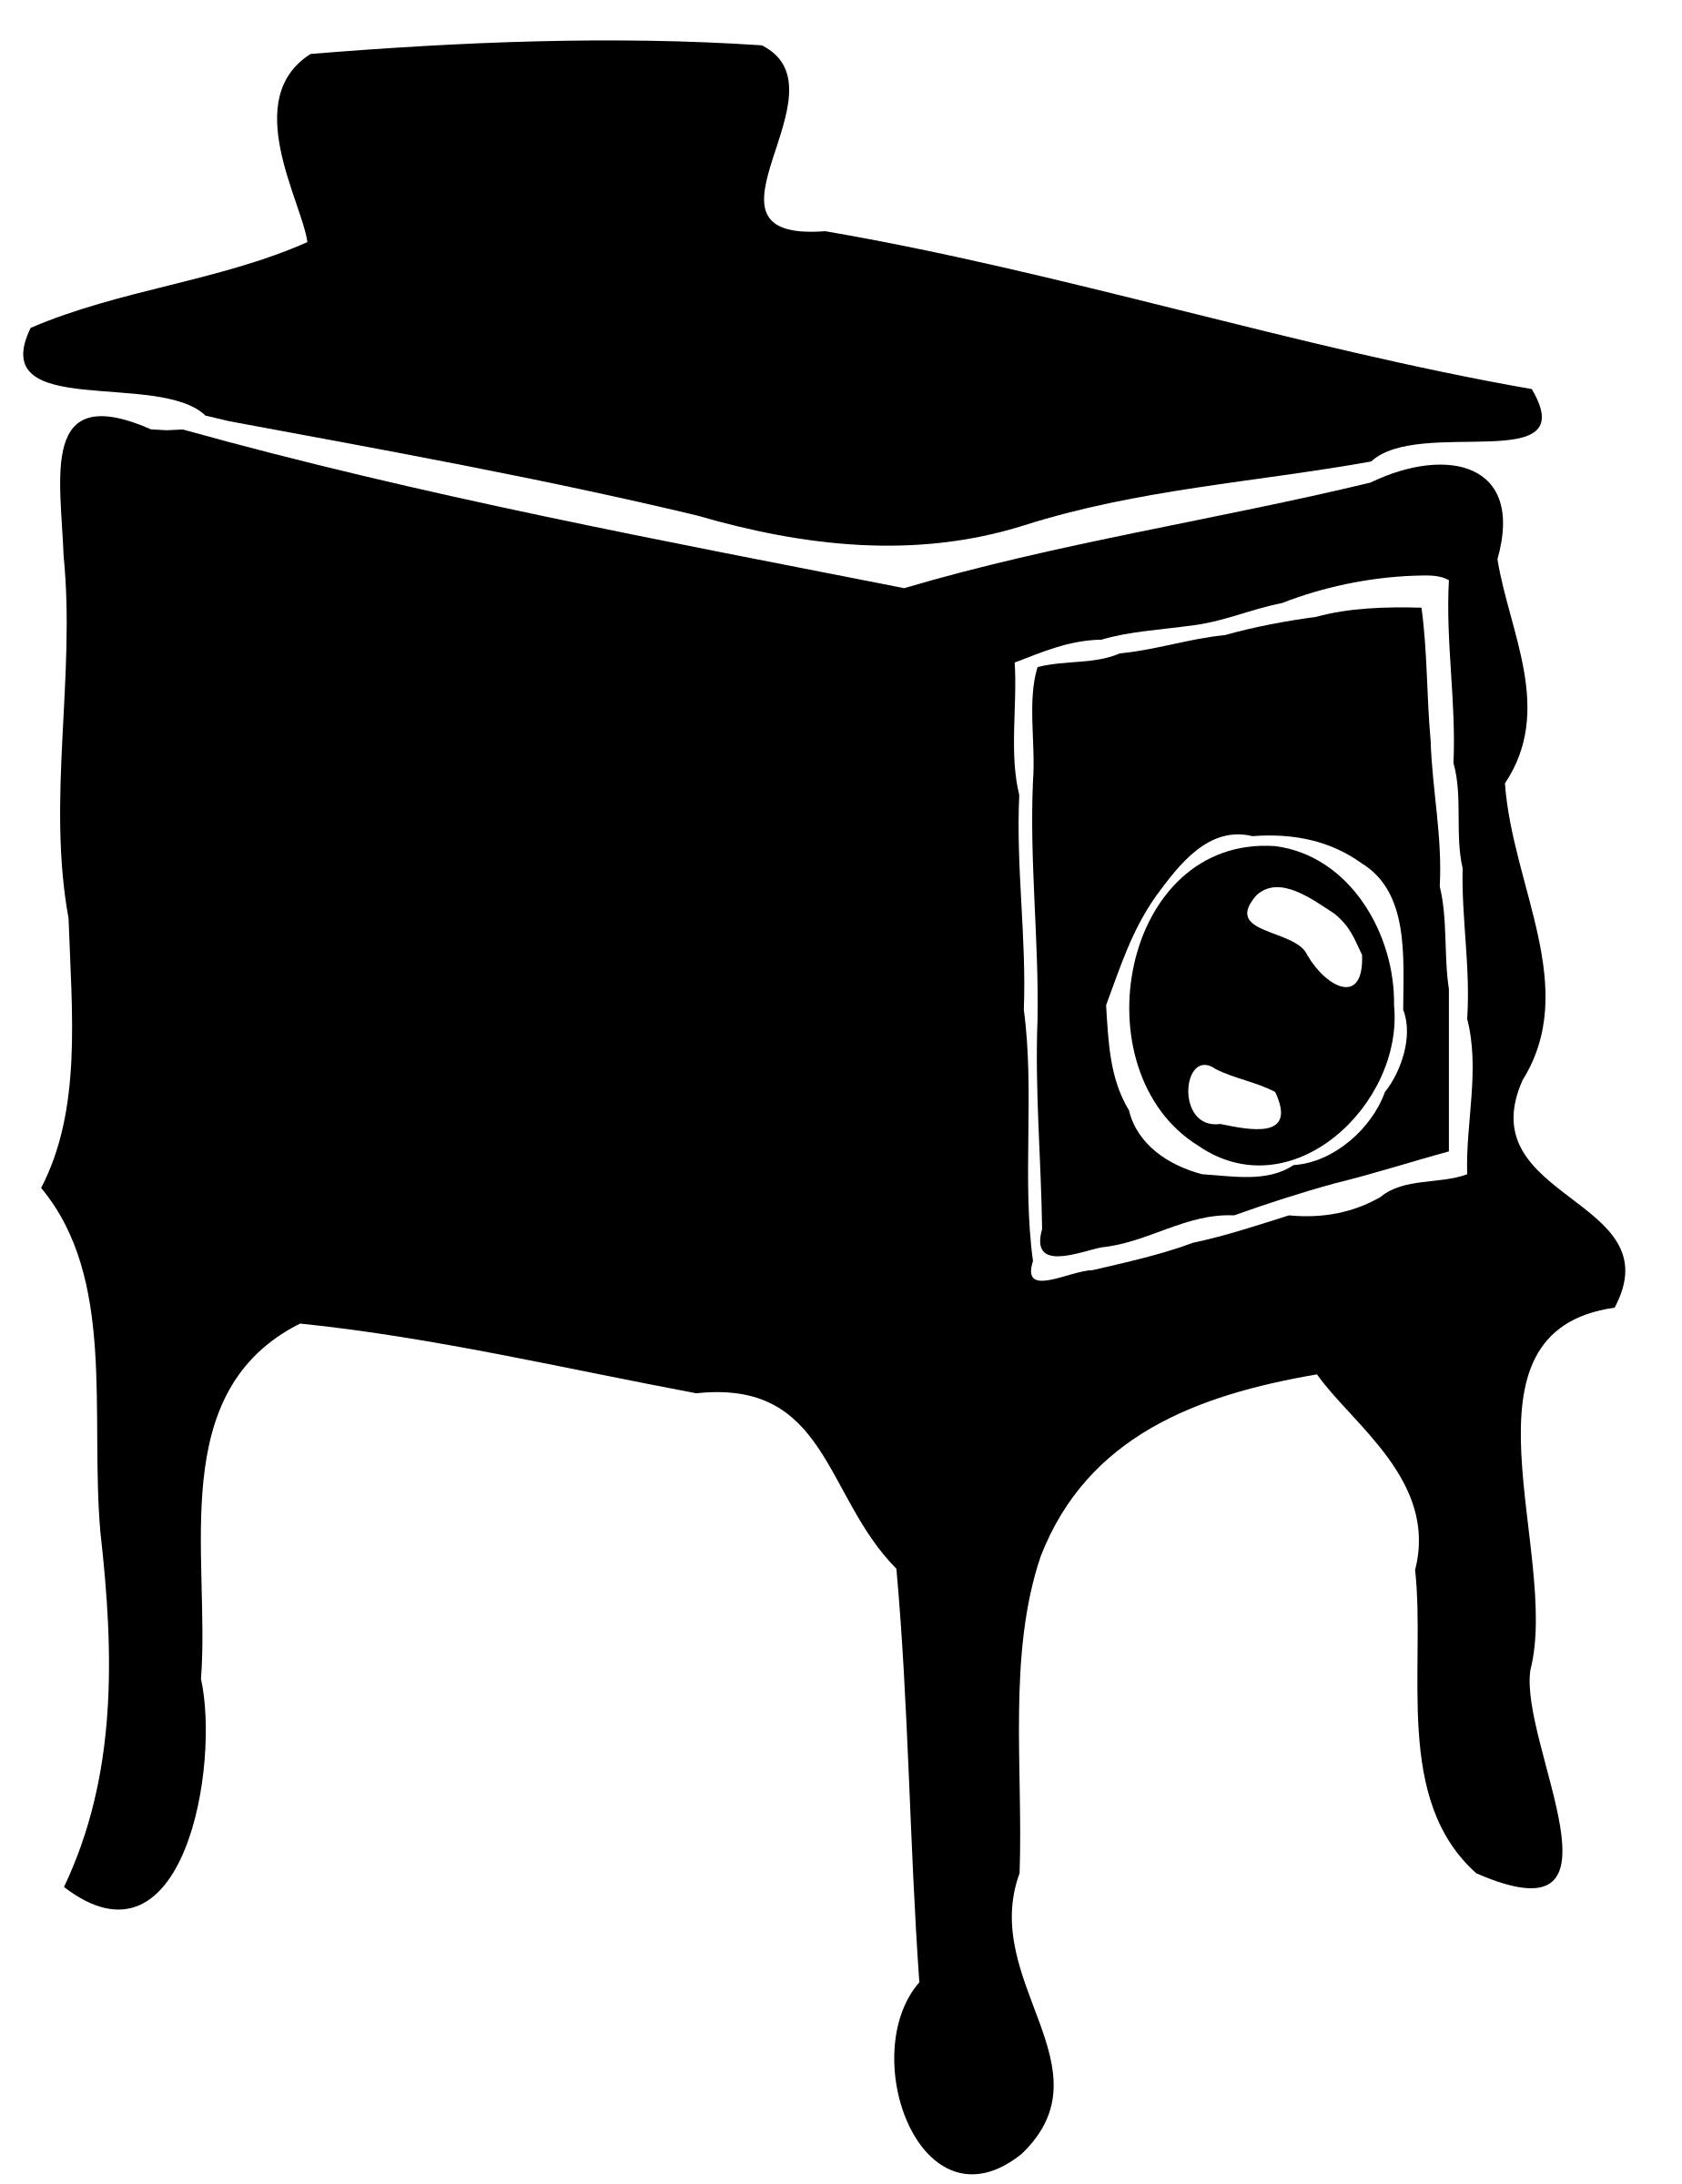 Old style stove png